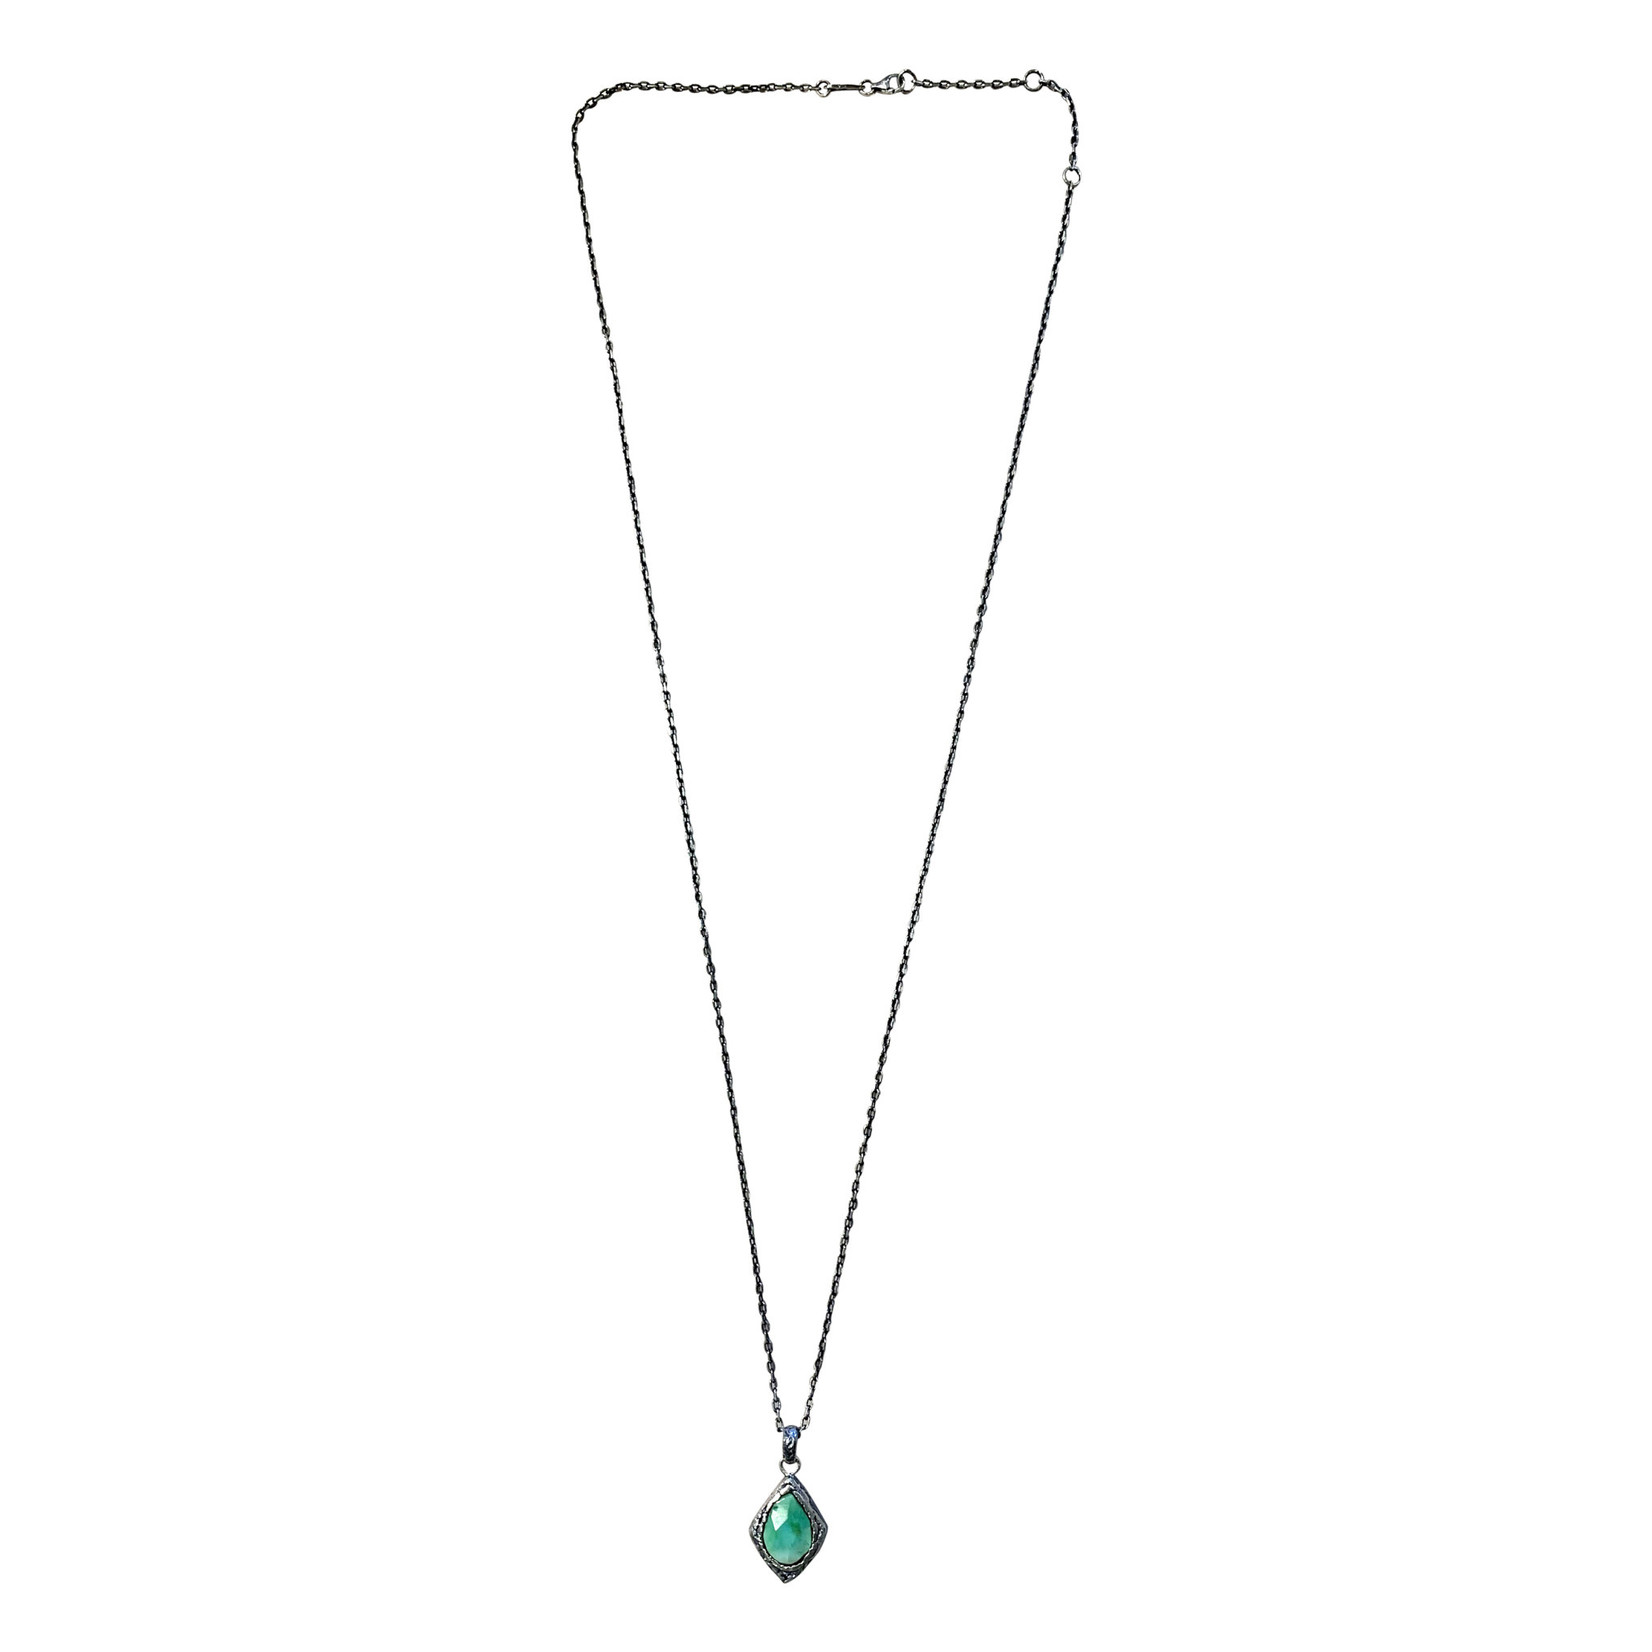 Buck Palmer Turquoise Opal Necklace